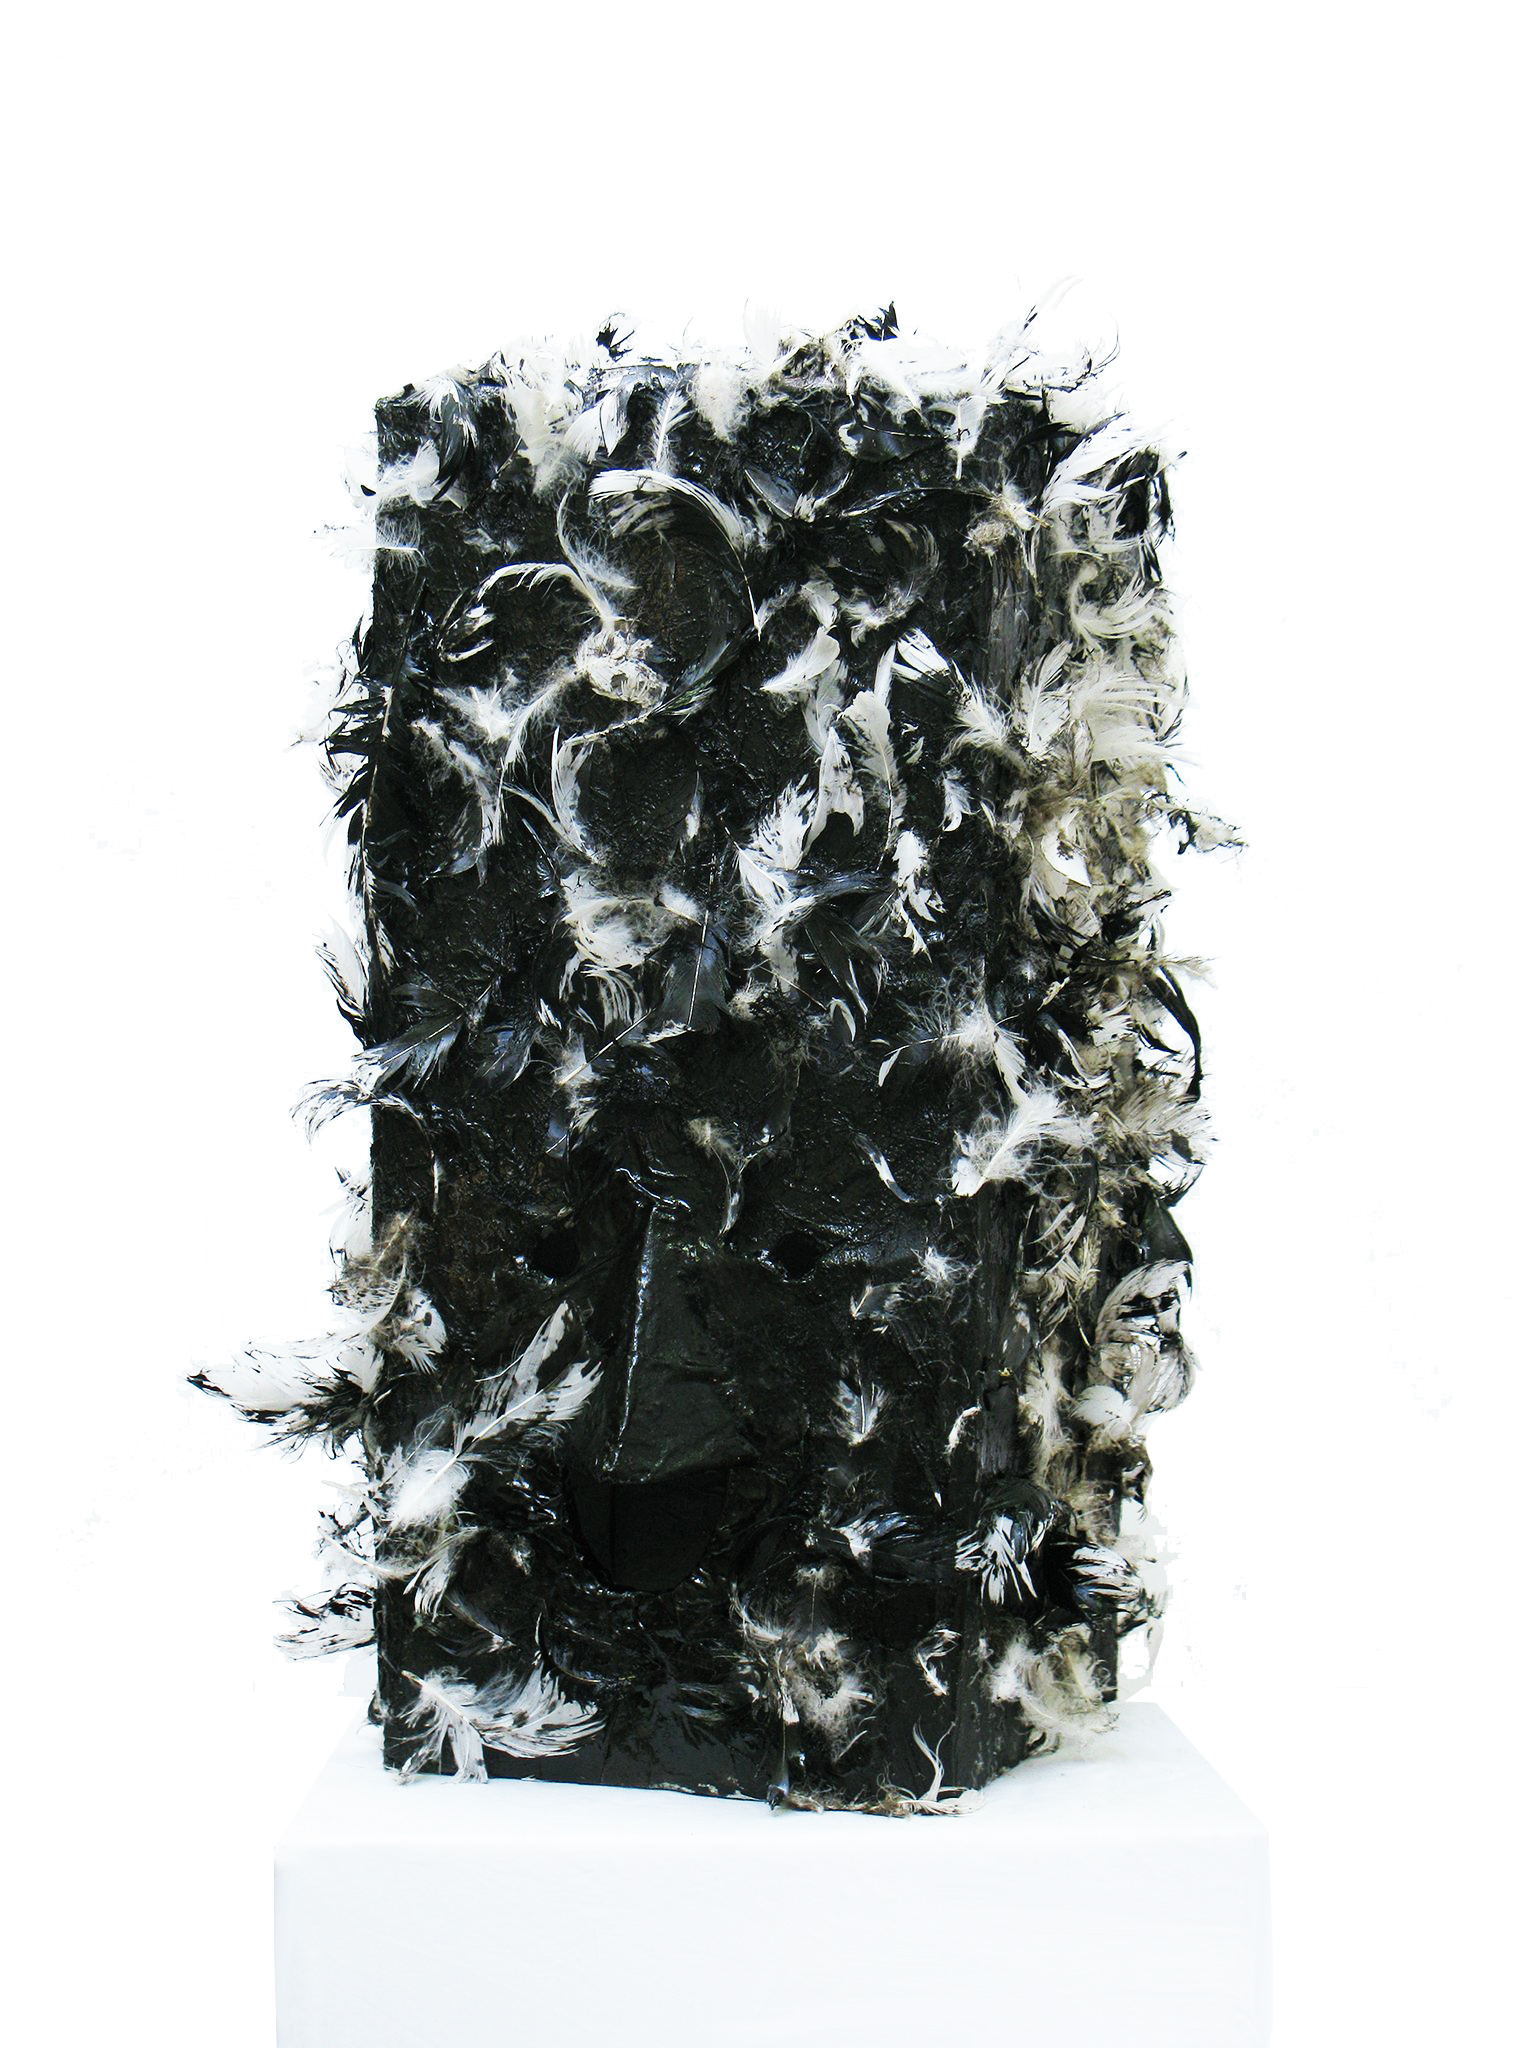 David Harrison Tarred and Feathered (Mobile Glory Hole), 2012 Cardboard, tar and feathers 44 x 20 x 21 cm 17 3/8 x 7 7/8 x 8 1/4 in